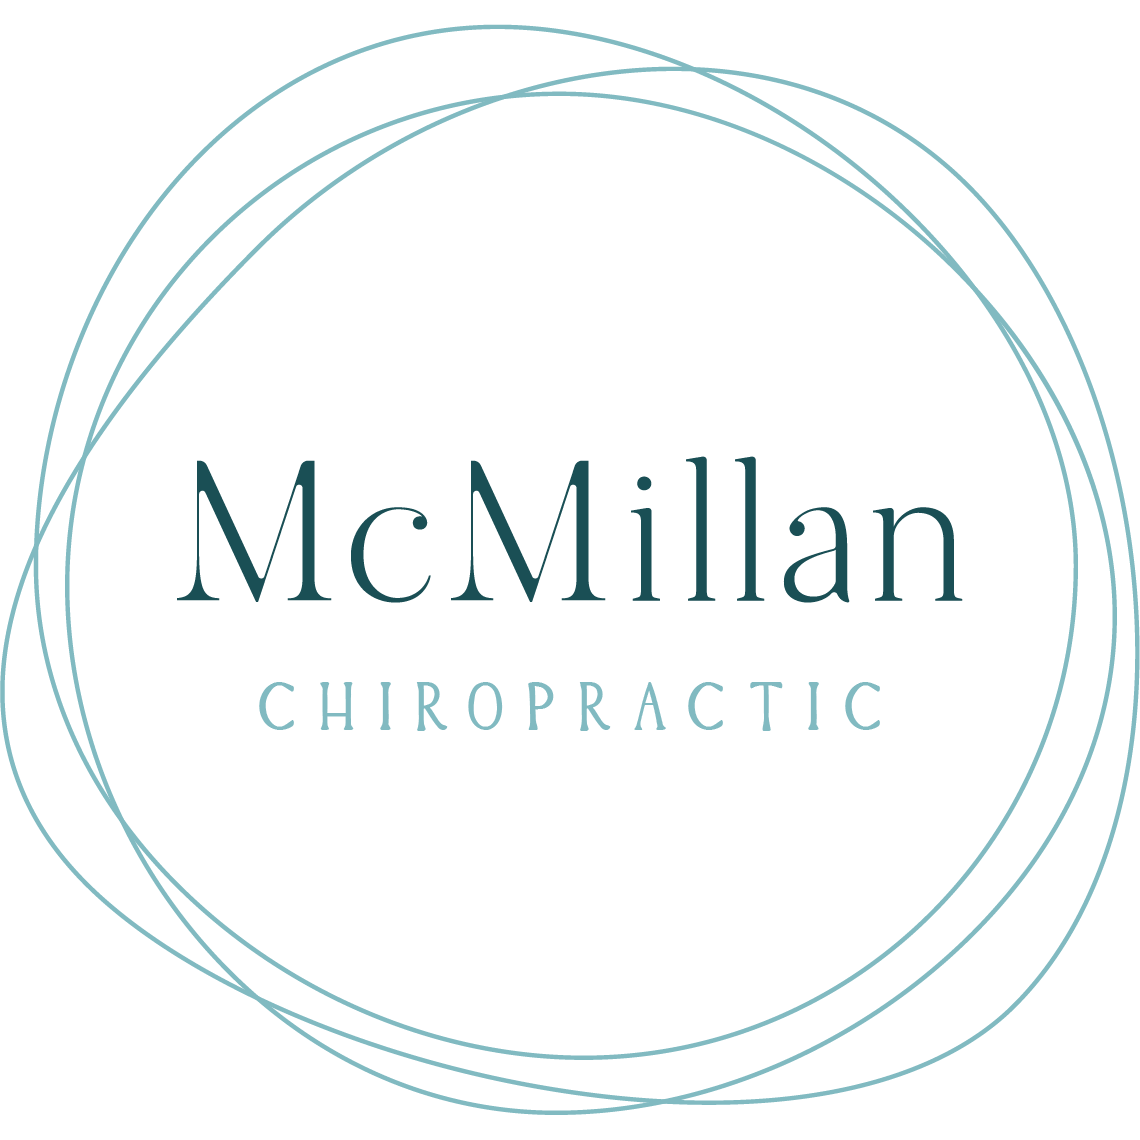 McMillan Chiropractic Centre Bairnsdale (03) 5152 2621